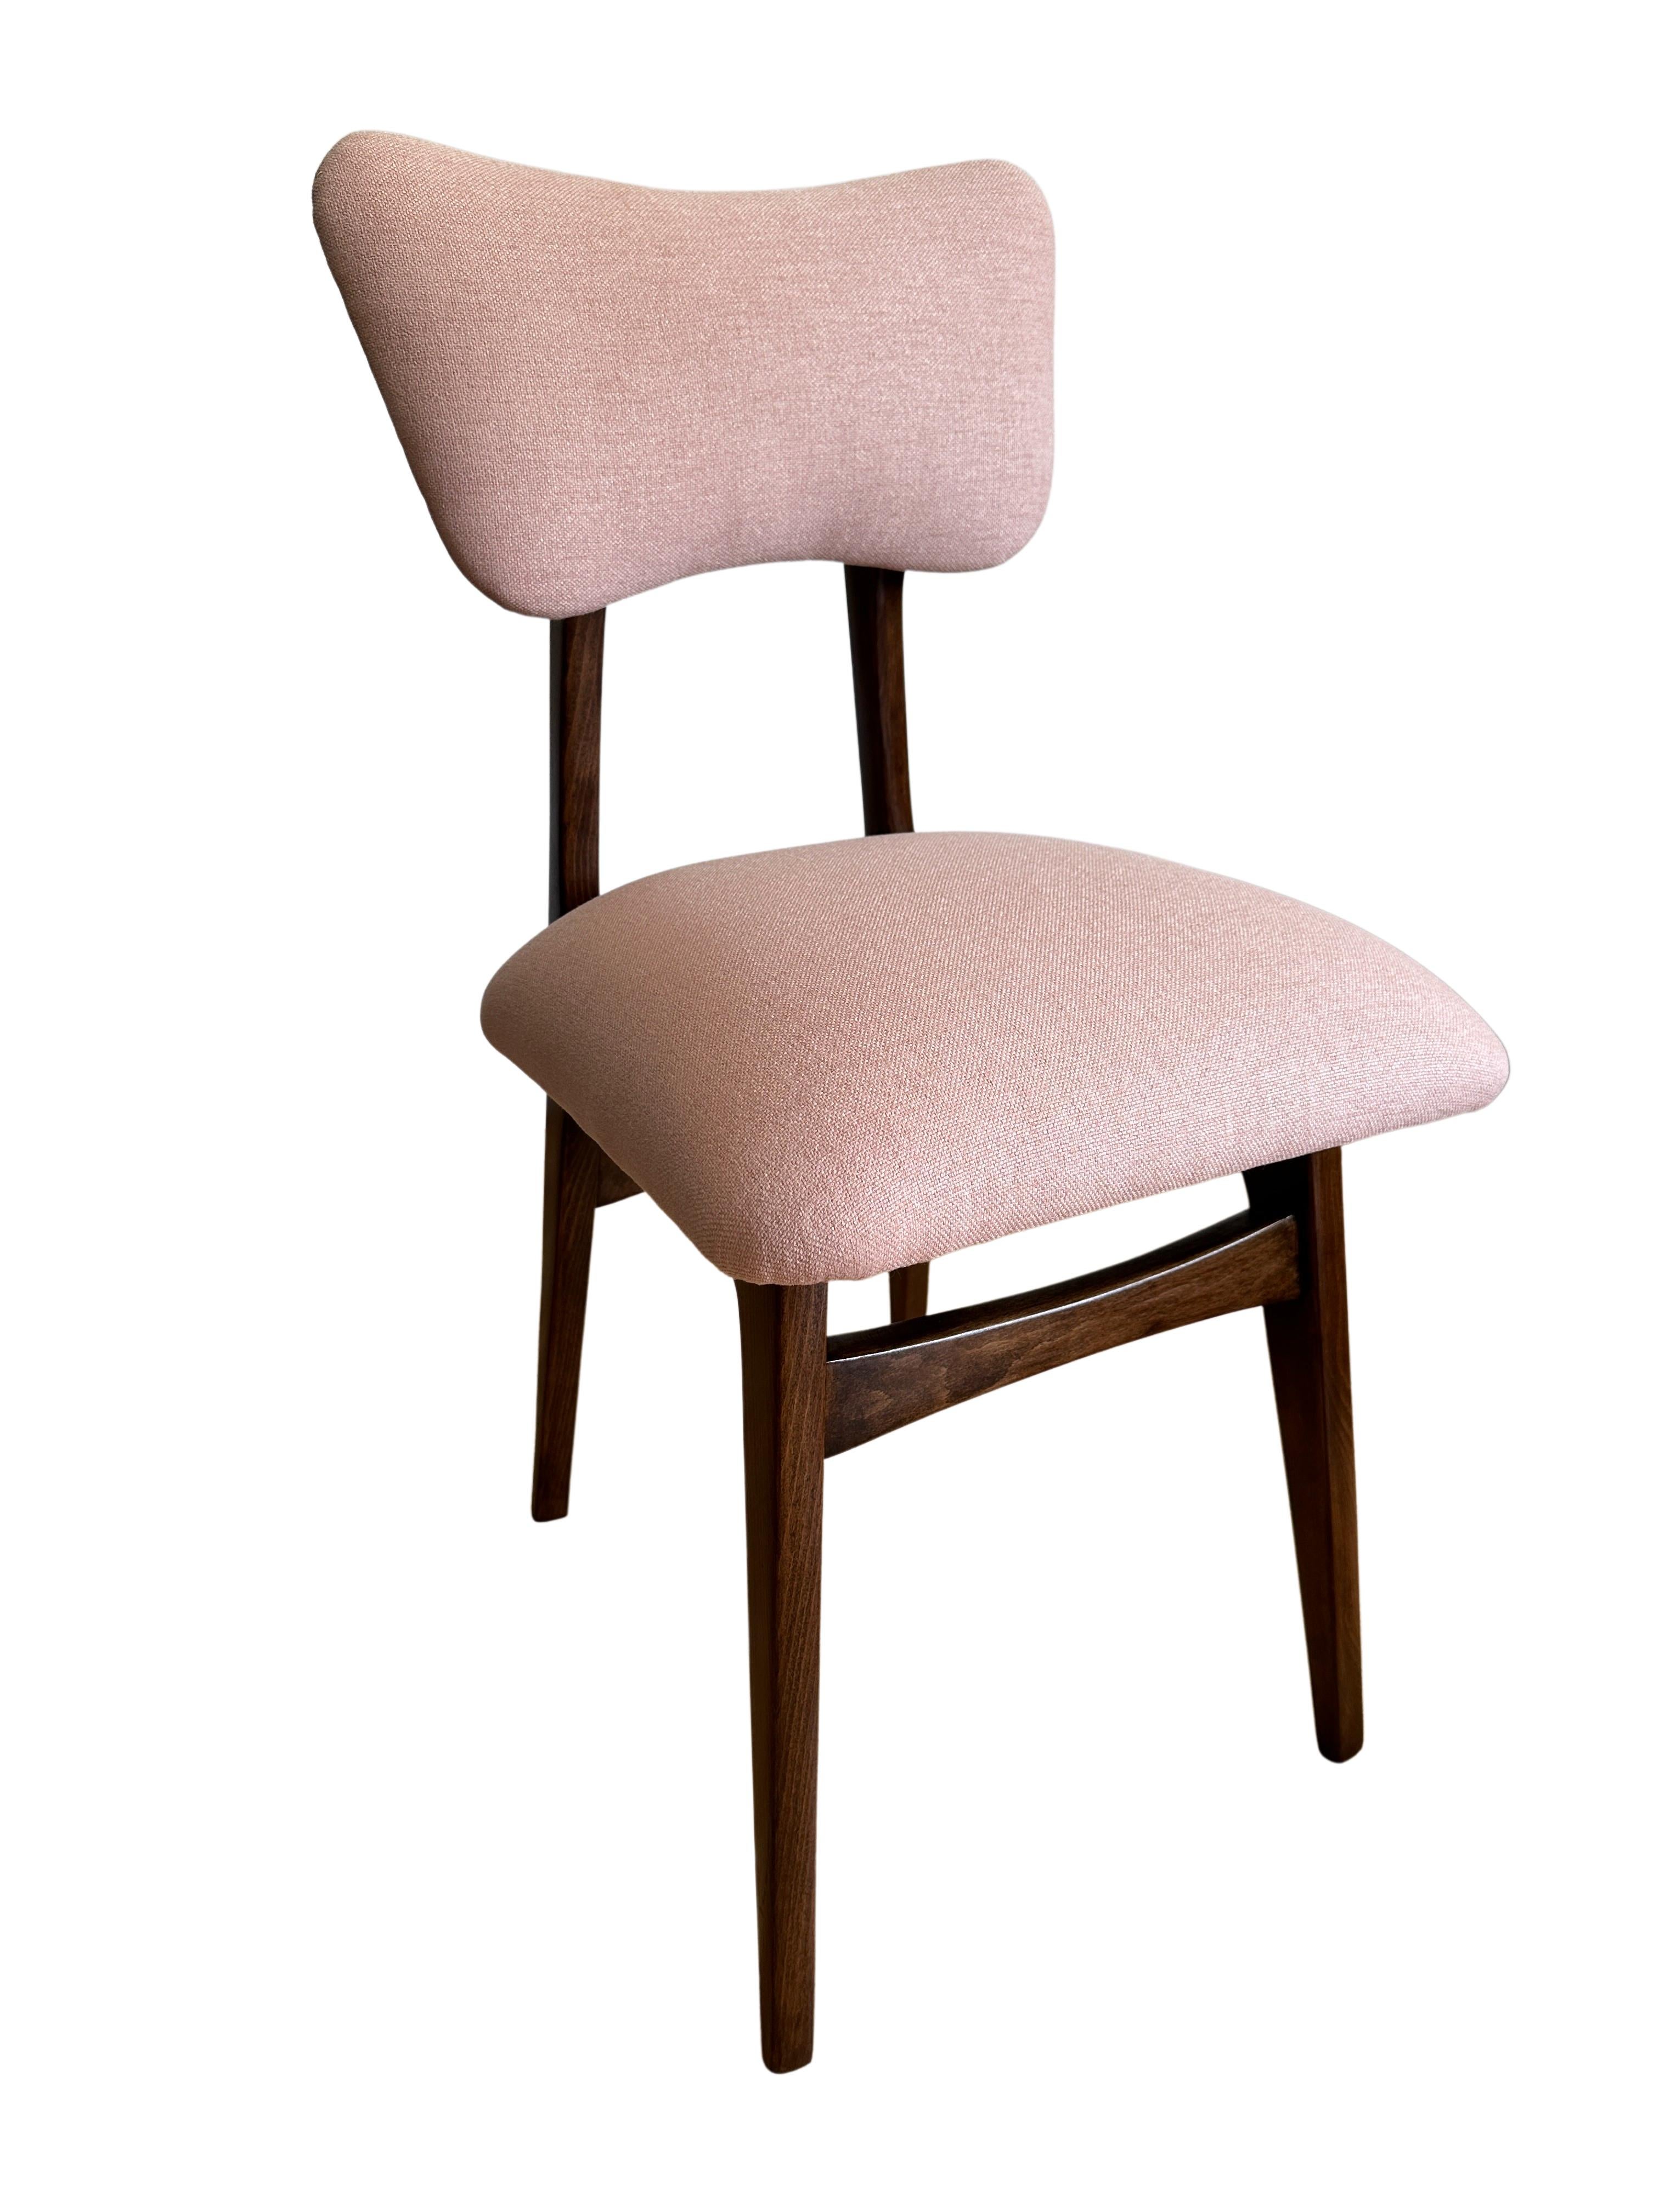 Midcentury Wooden Dining Chair in Light Pink Upholstery, Europe, 1960s For Sale 2